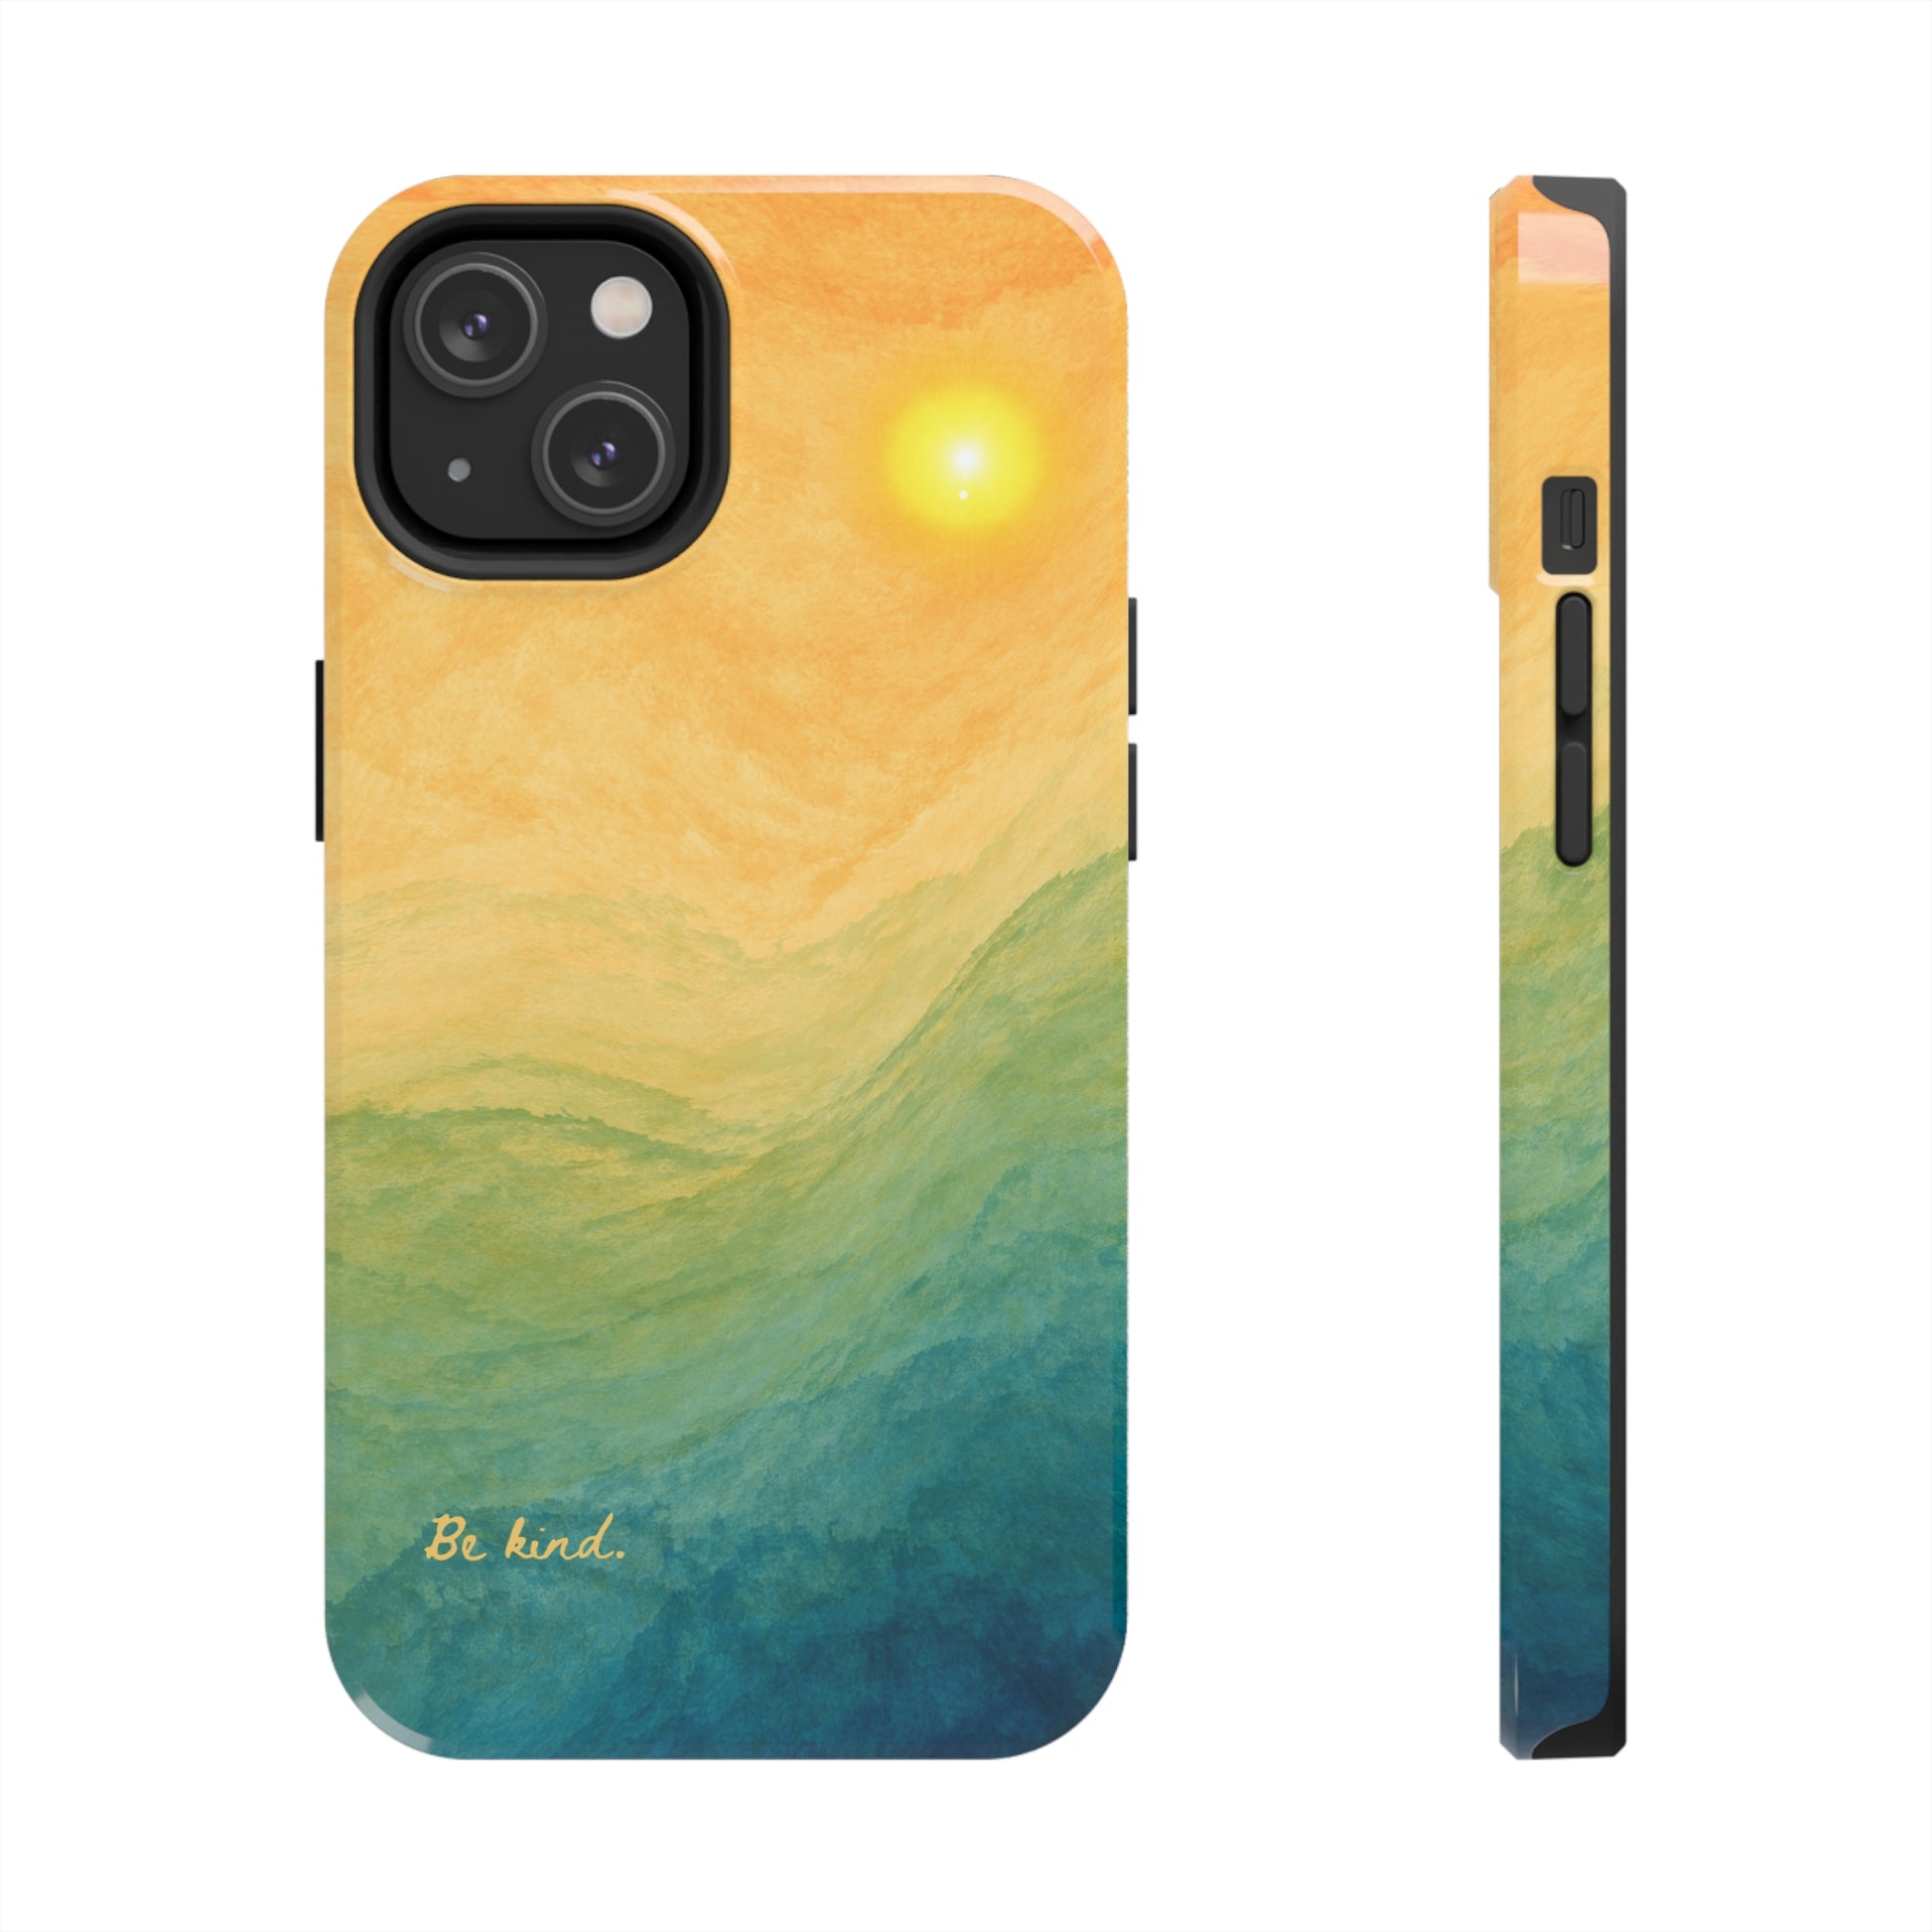 phone case featuring a serene view of the desert at sunset that says "be kind" at the bottom